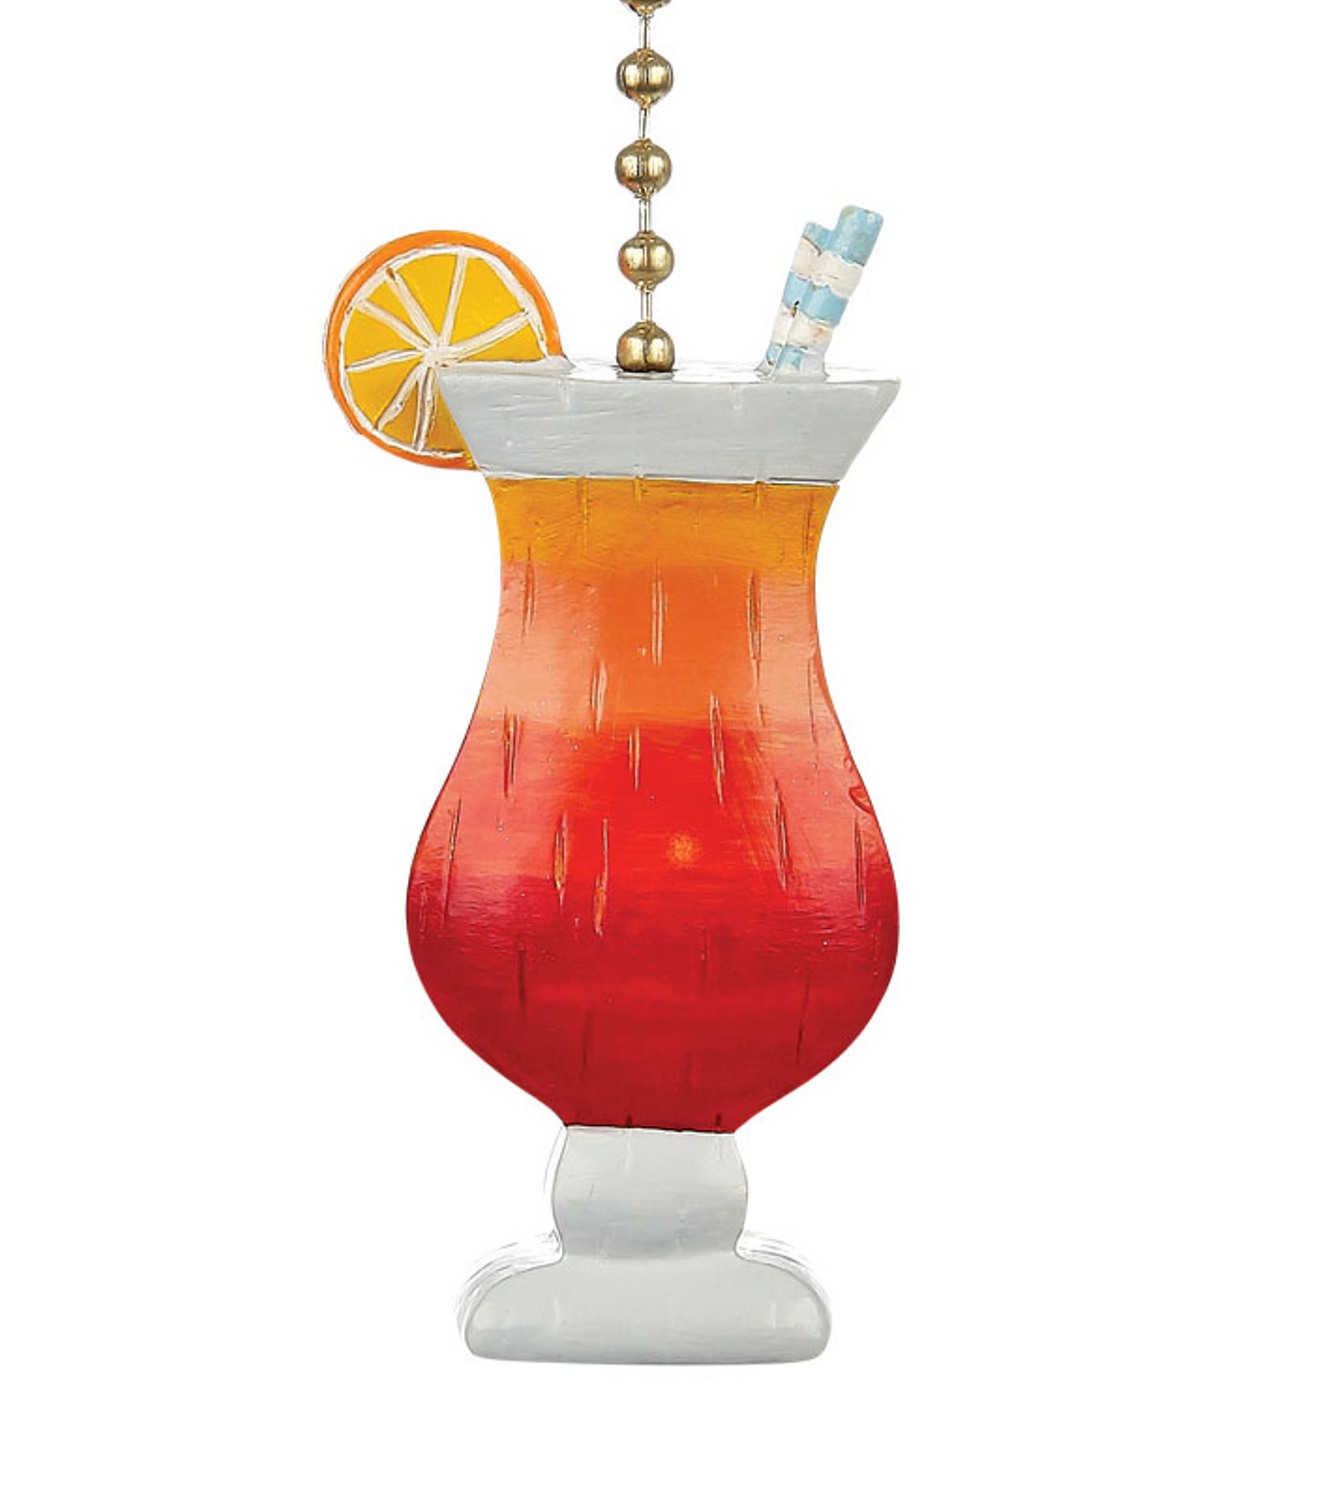 Clementine Beachy Fruity Drink Decorative Ceiling Fan Light Dimensional Pull